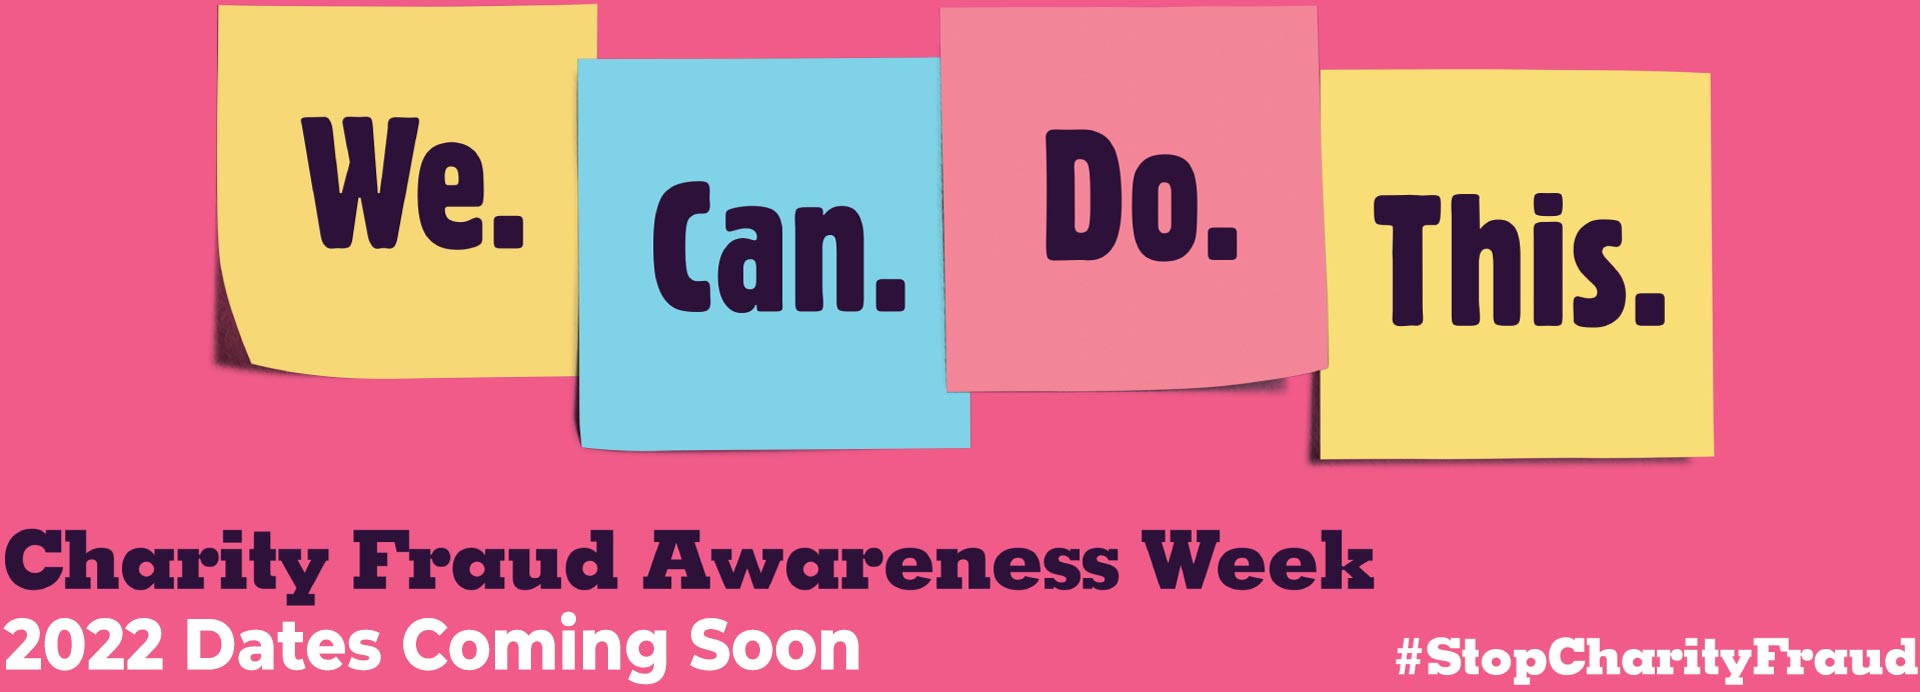 We. Can. Do. This. Charity Fraud Awareness Week